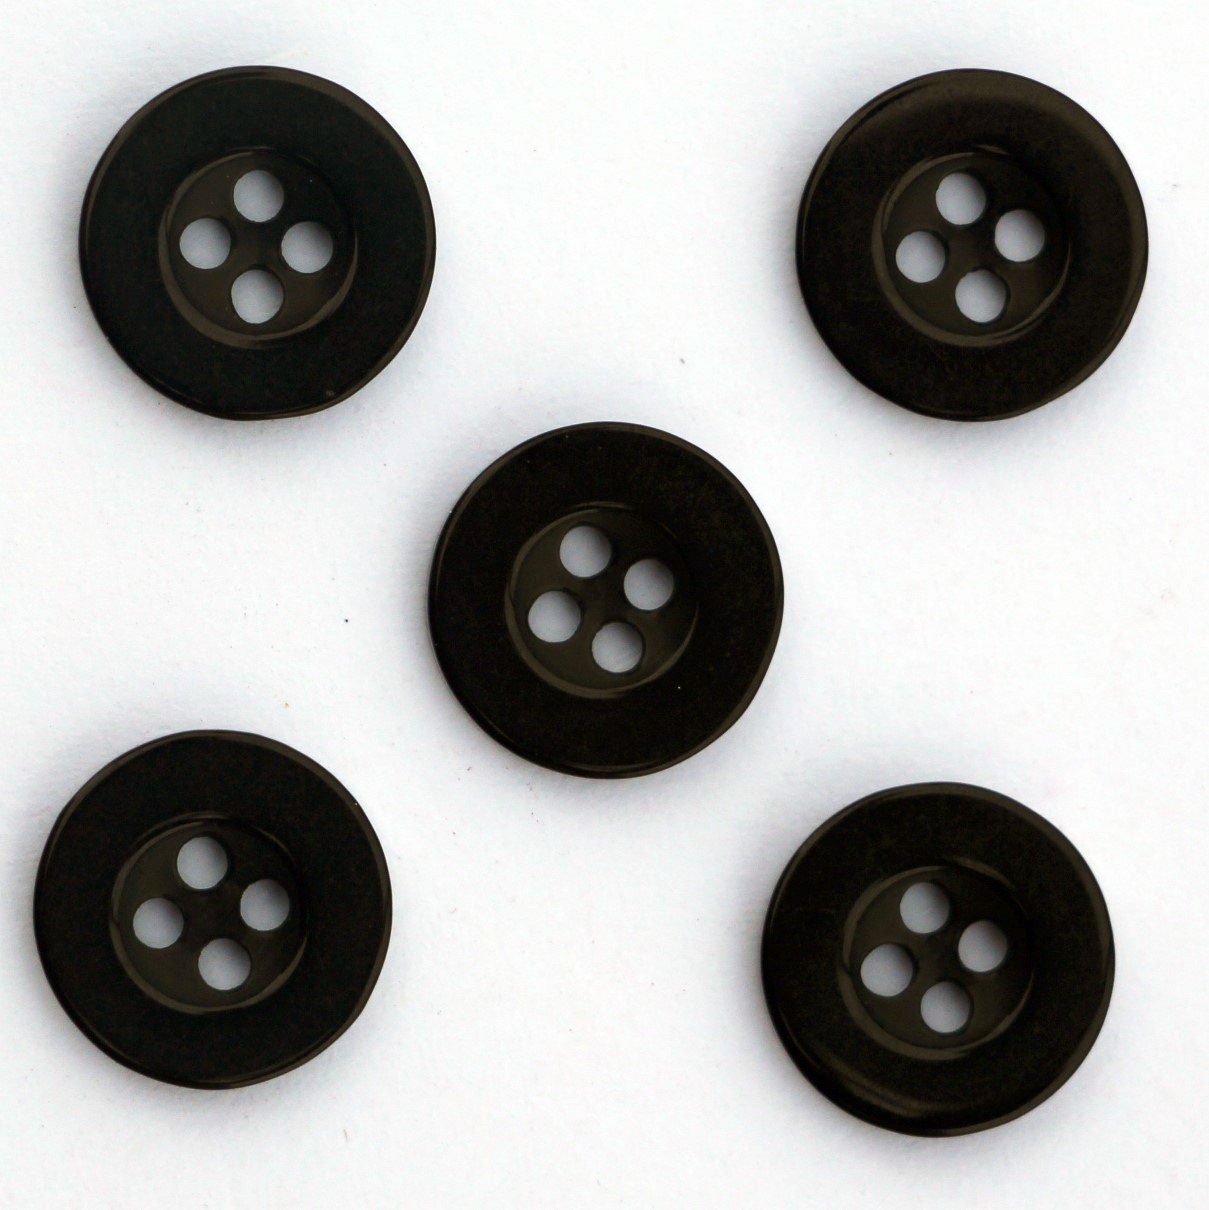 Large Round 4 Hole Resin Sewing Button Black White Red Buttons